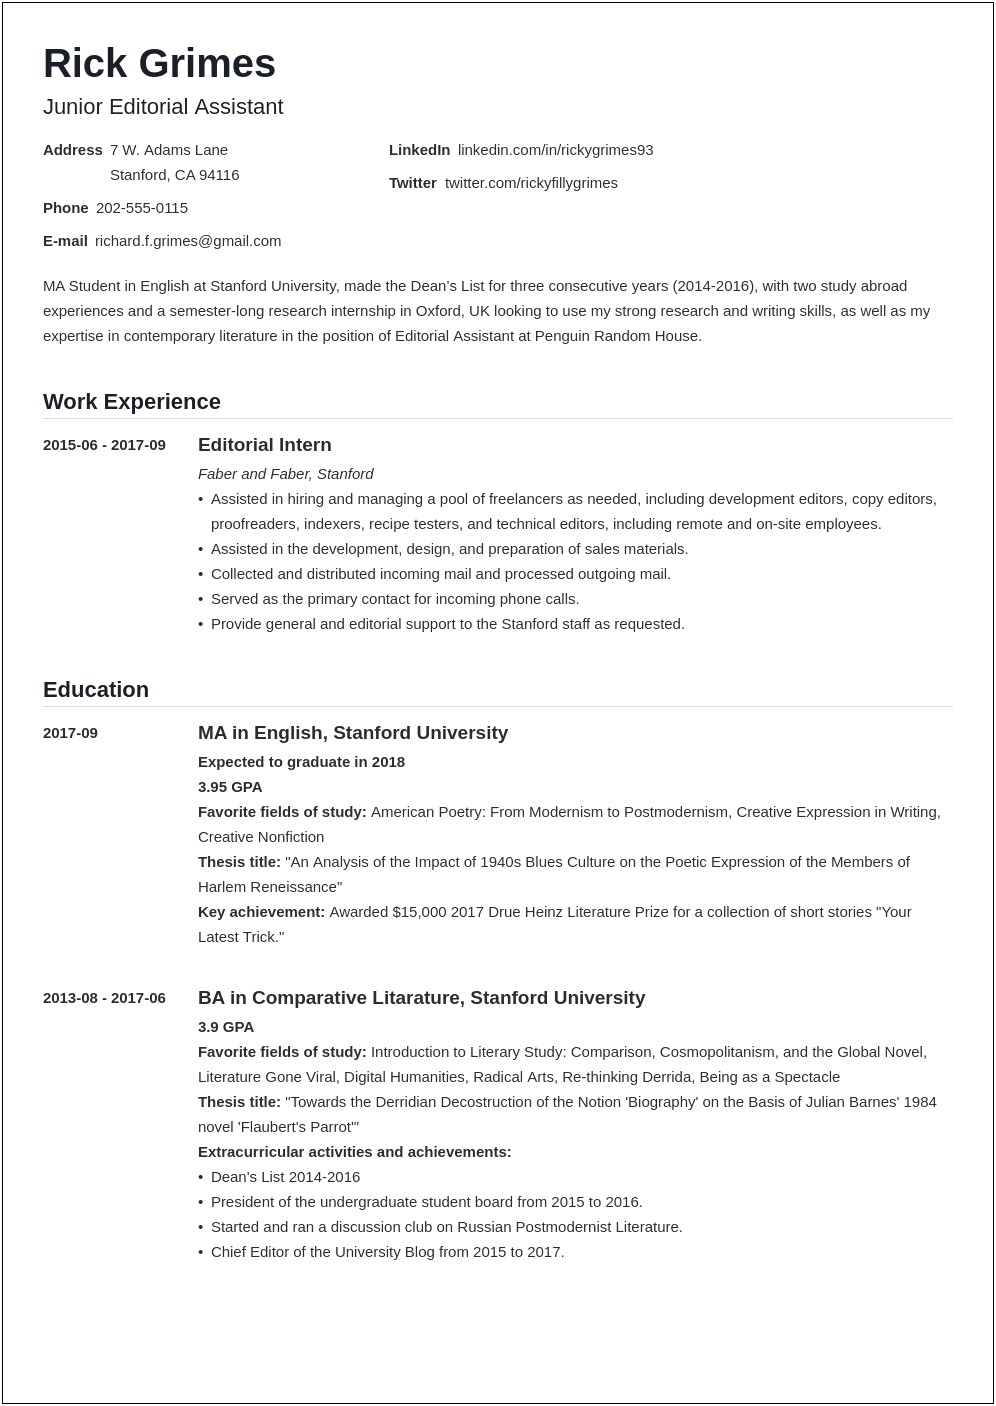 Resume Graduated With Honors Examples